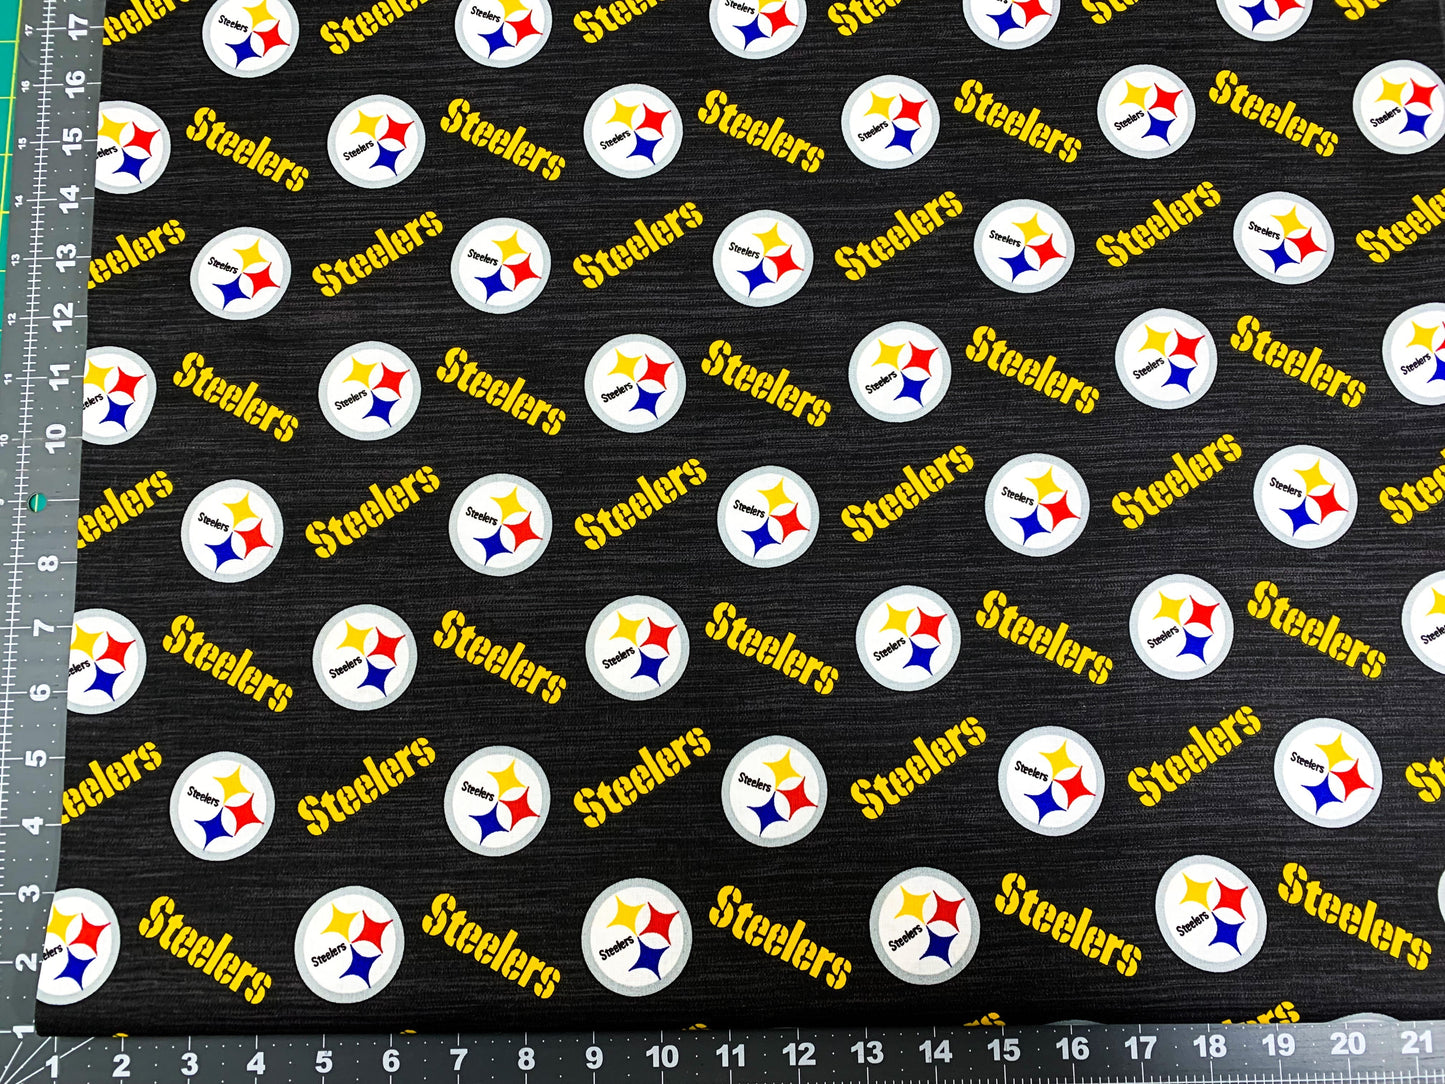 Pittsburgh Steelers fabric 70499-D Steeler NFL fabric